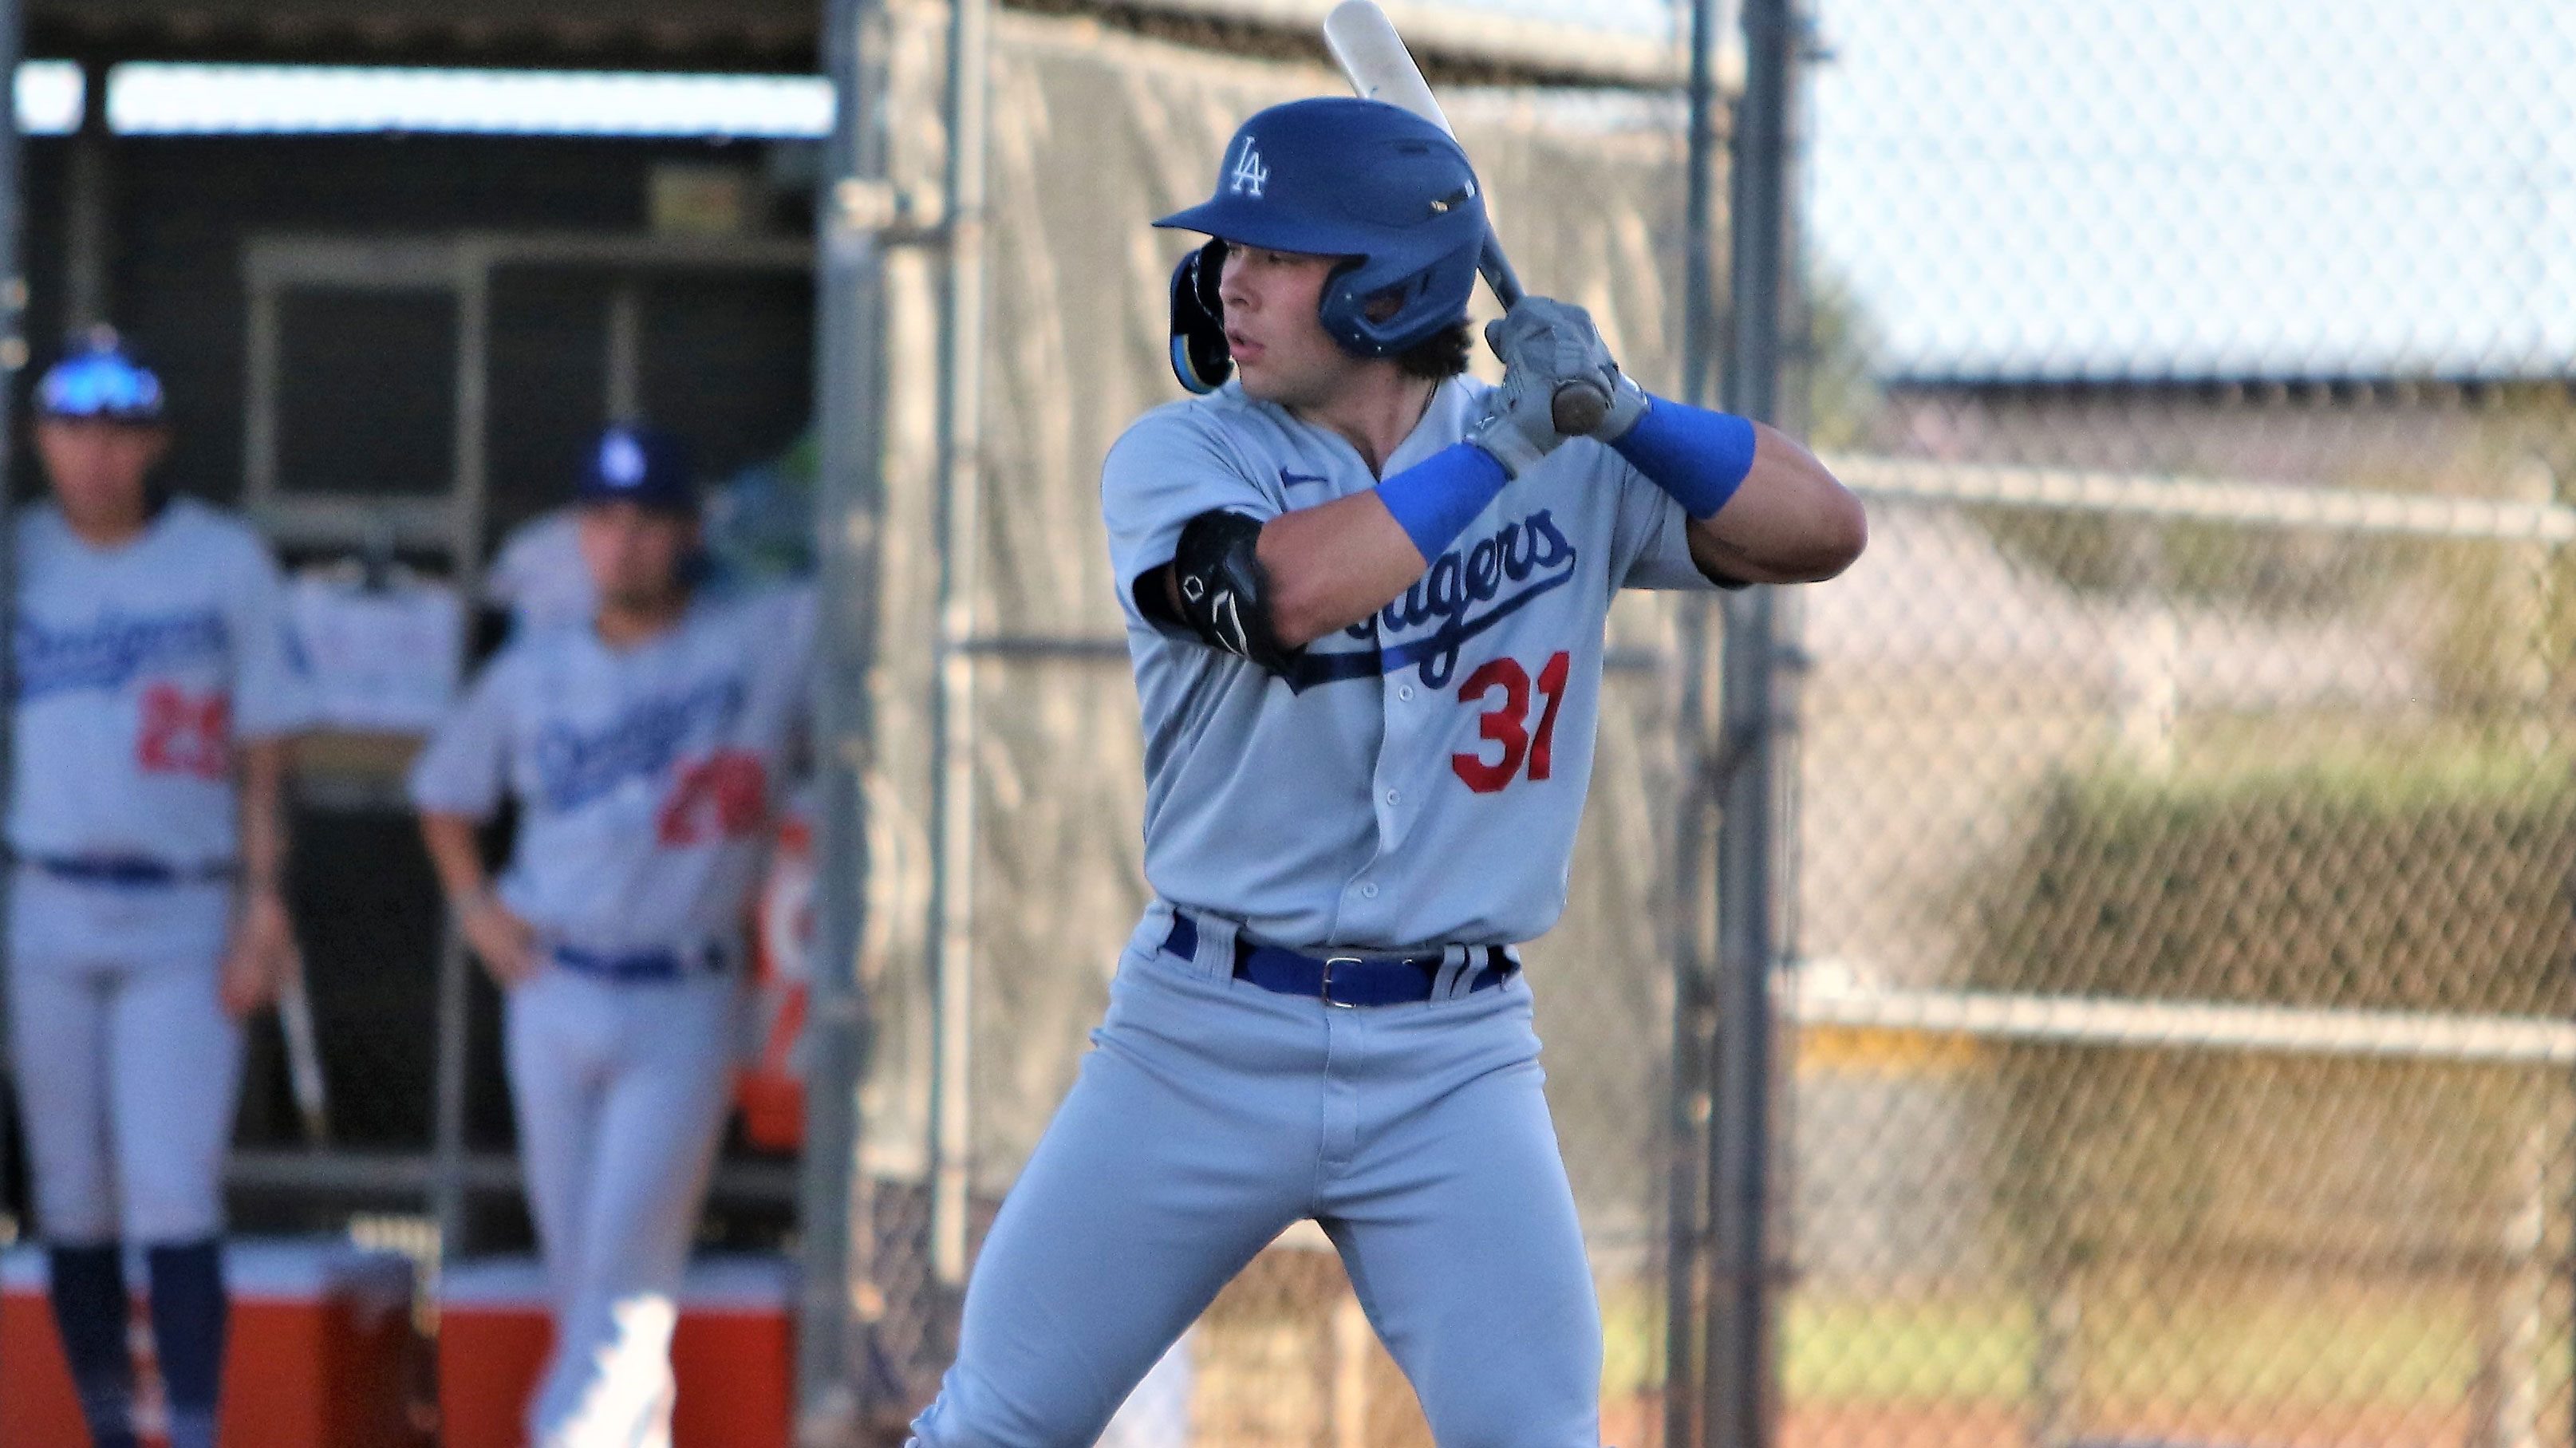 Catcher Dalton Rushing was drafted by the Dodgers in the second round of the 2021 MLB Draft, the 40th overall selection.